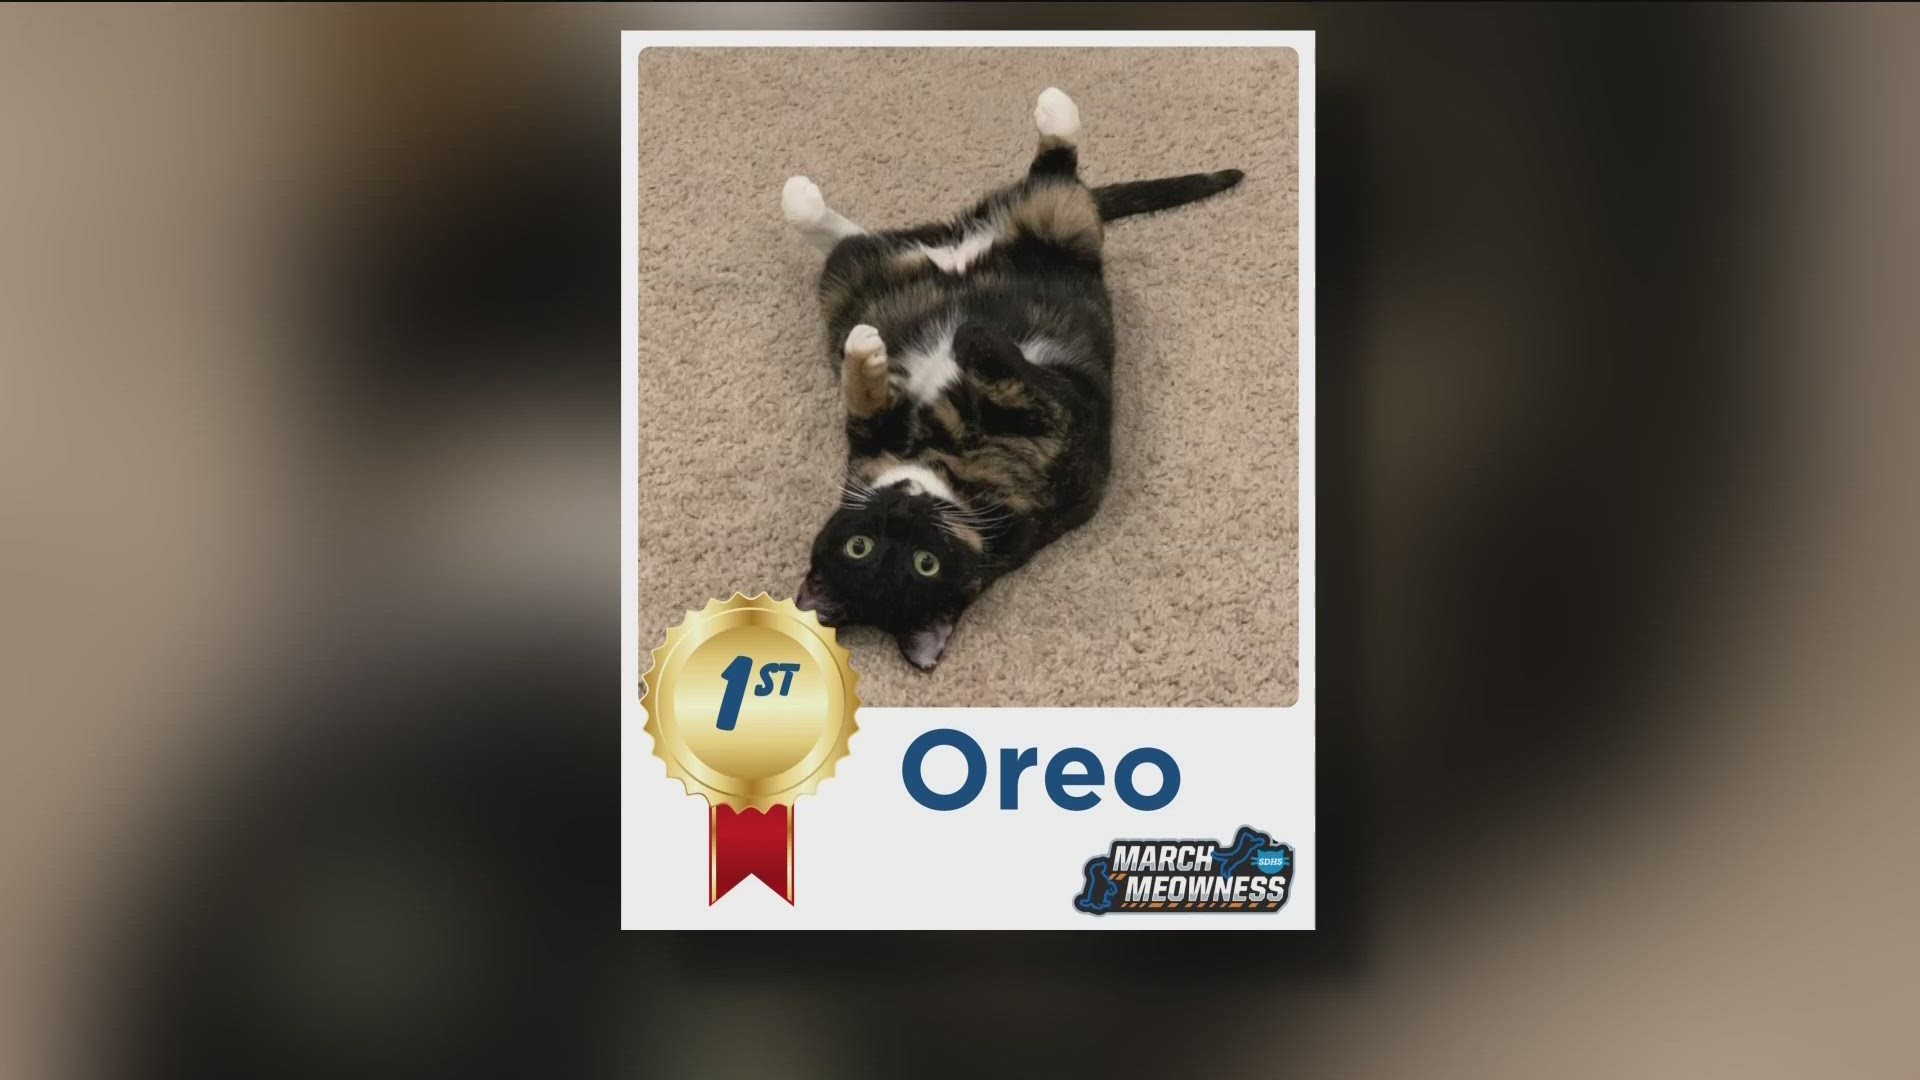 Oreo the cat won the contest, followed by Frodo the goat in second. Almost 200,000 votes were tallied in the fierce competition.